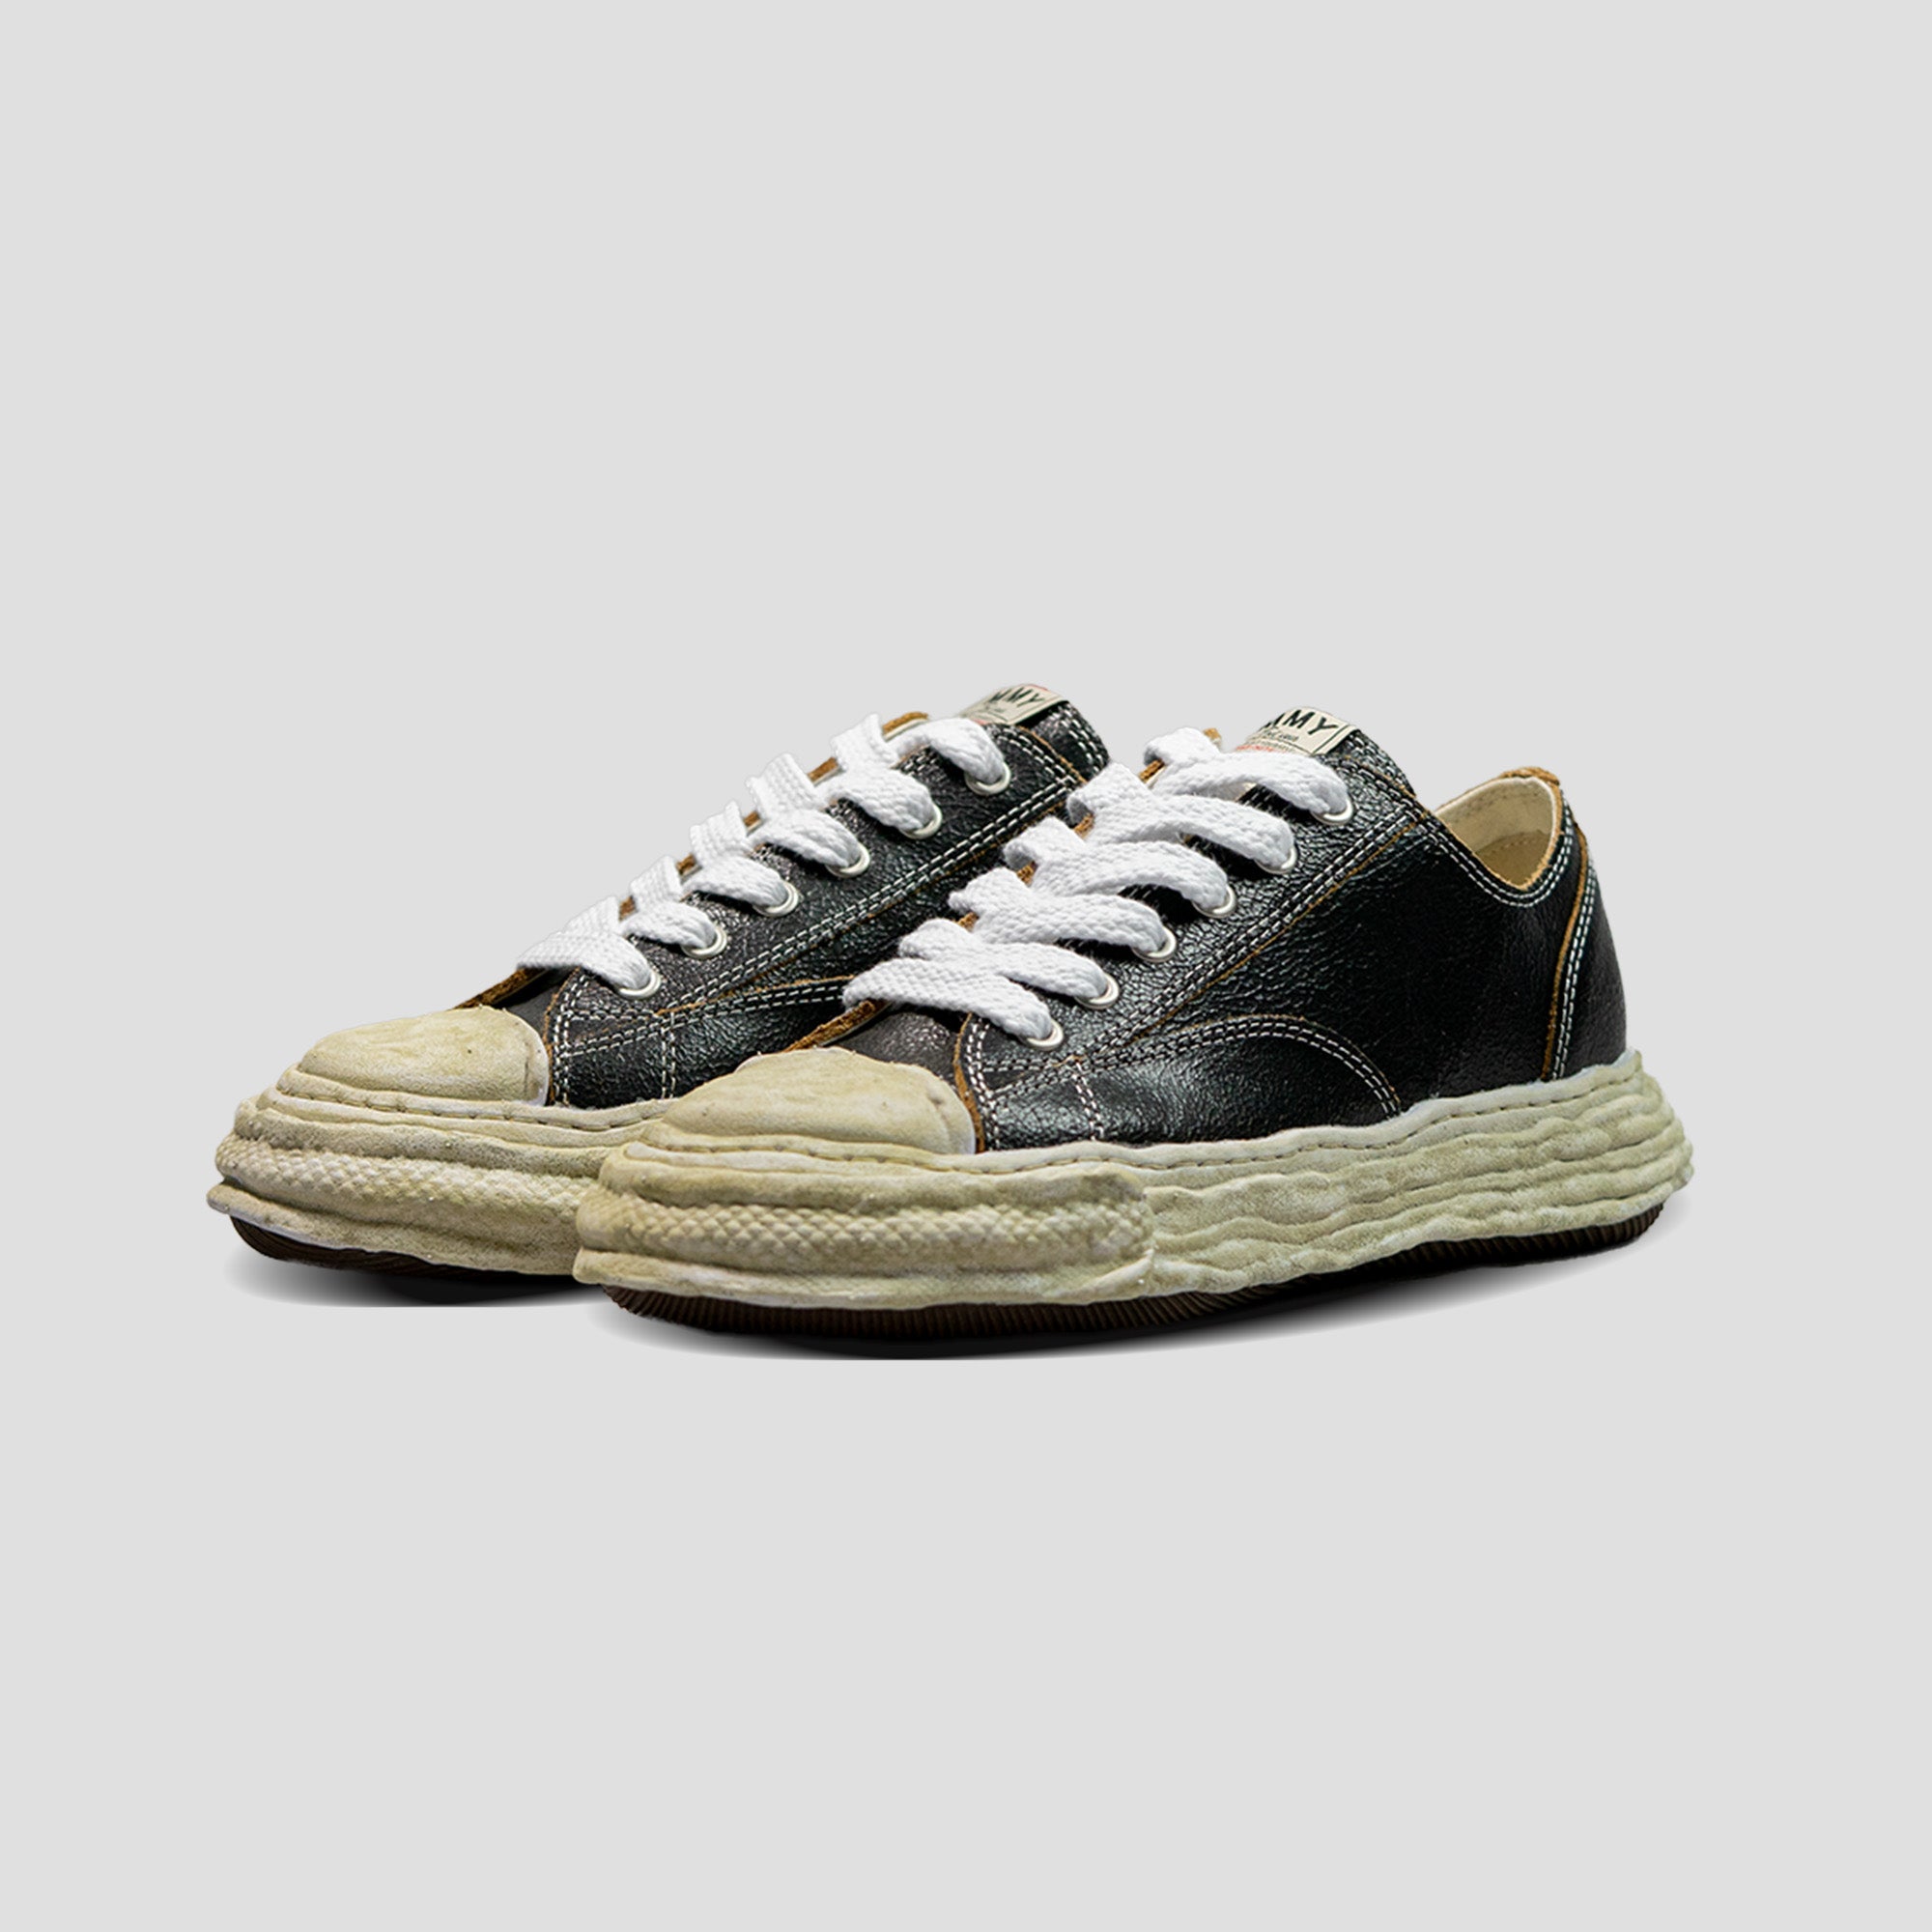 PETERSON 23 OG SOLE LOW-TOP CRACK LEATHER SNEAKERS